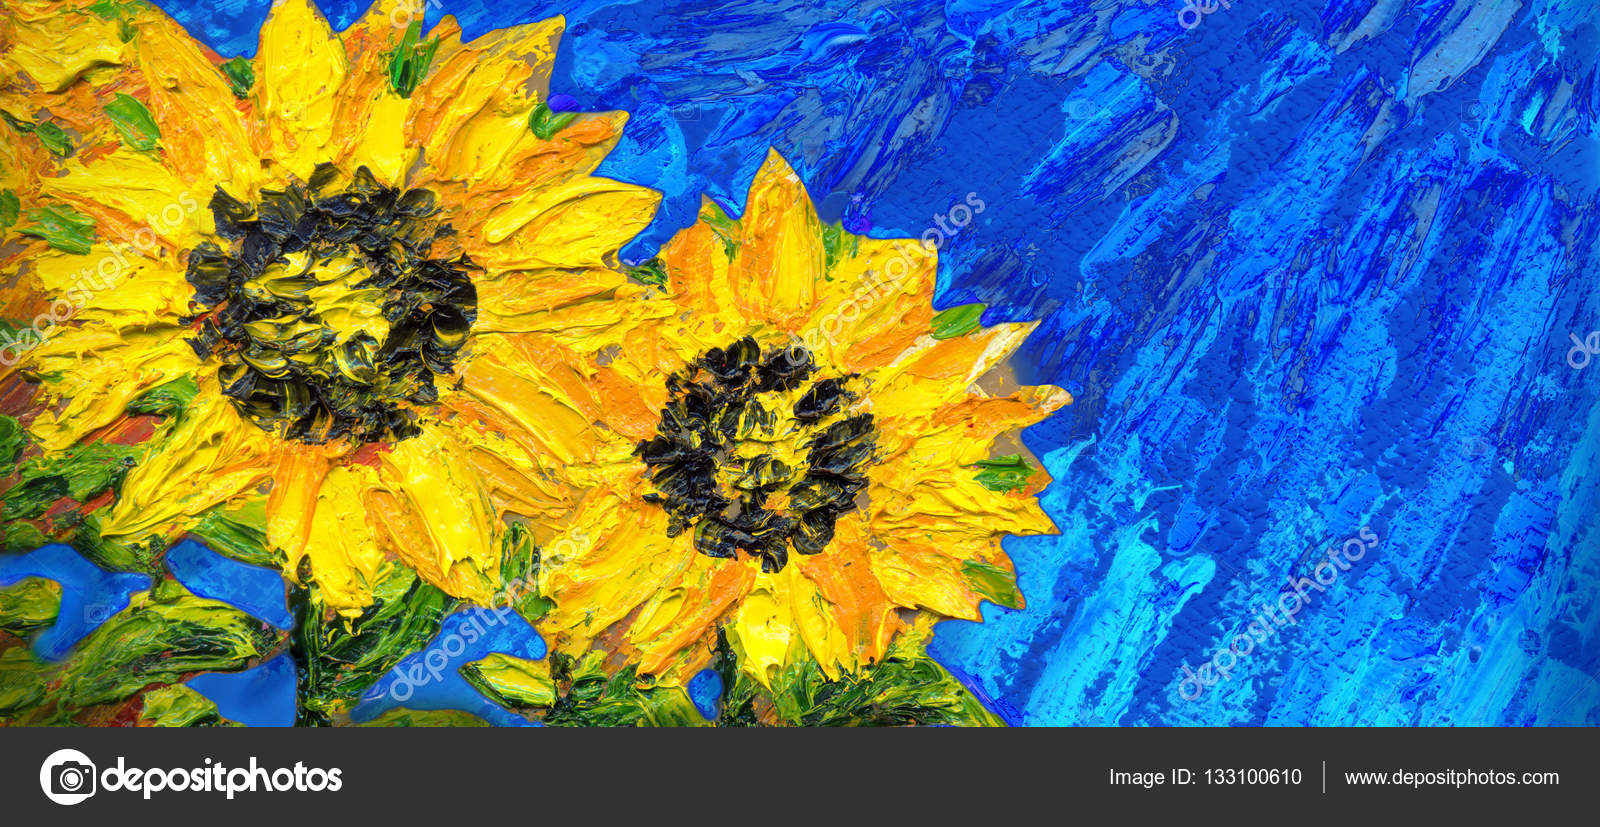 Abstract Sunflower Painting Abstract Painting Bright Sunflowers